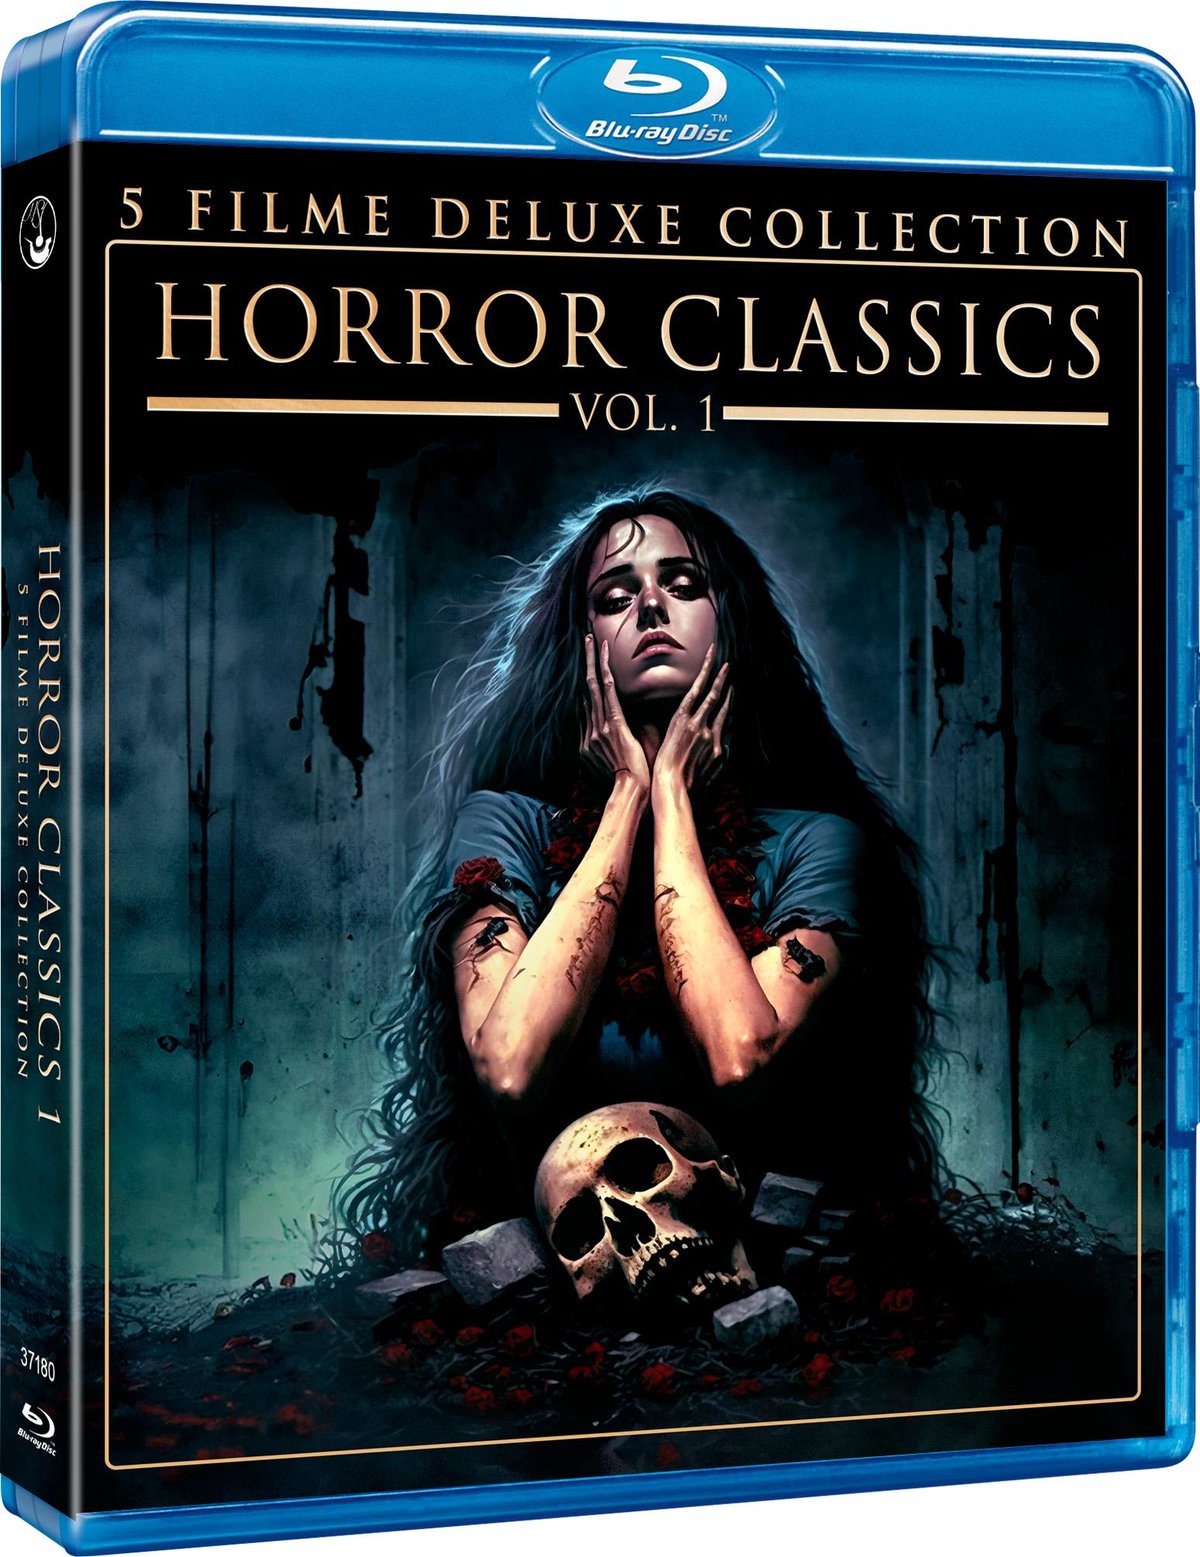 Horror Classics Vol. 1 - Deluxe Collection  [5 BRs]  (Blu-ray Disc)